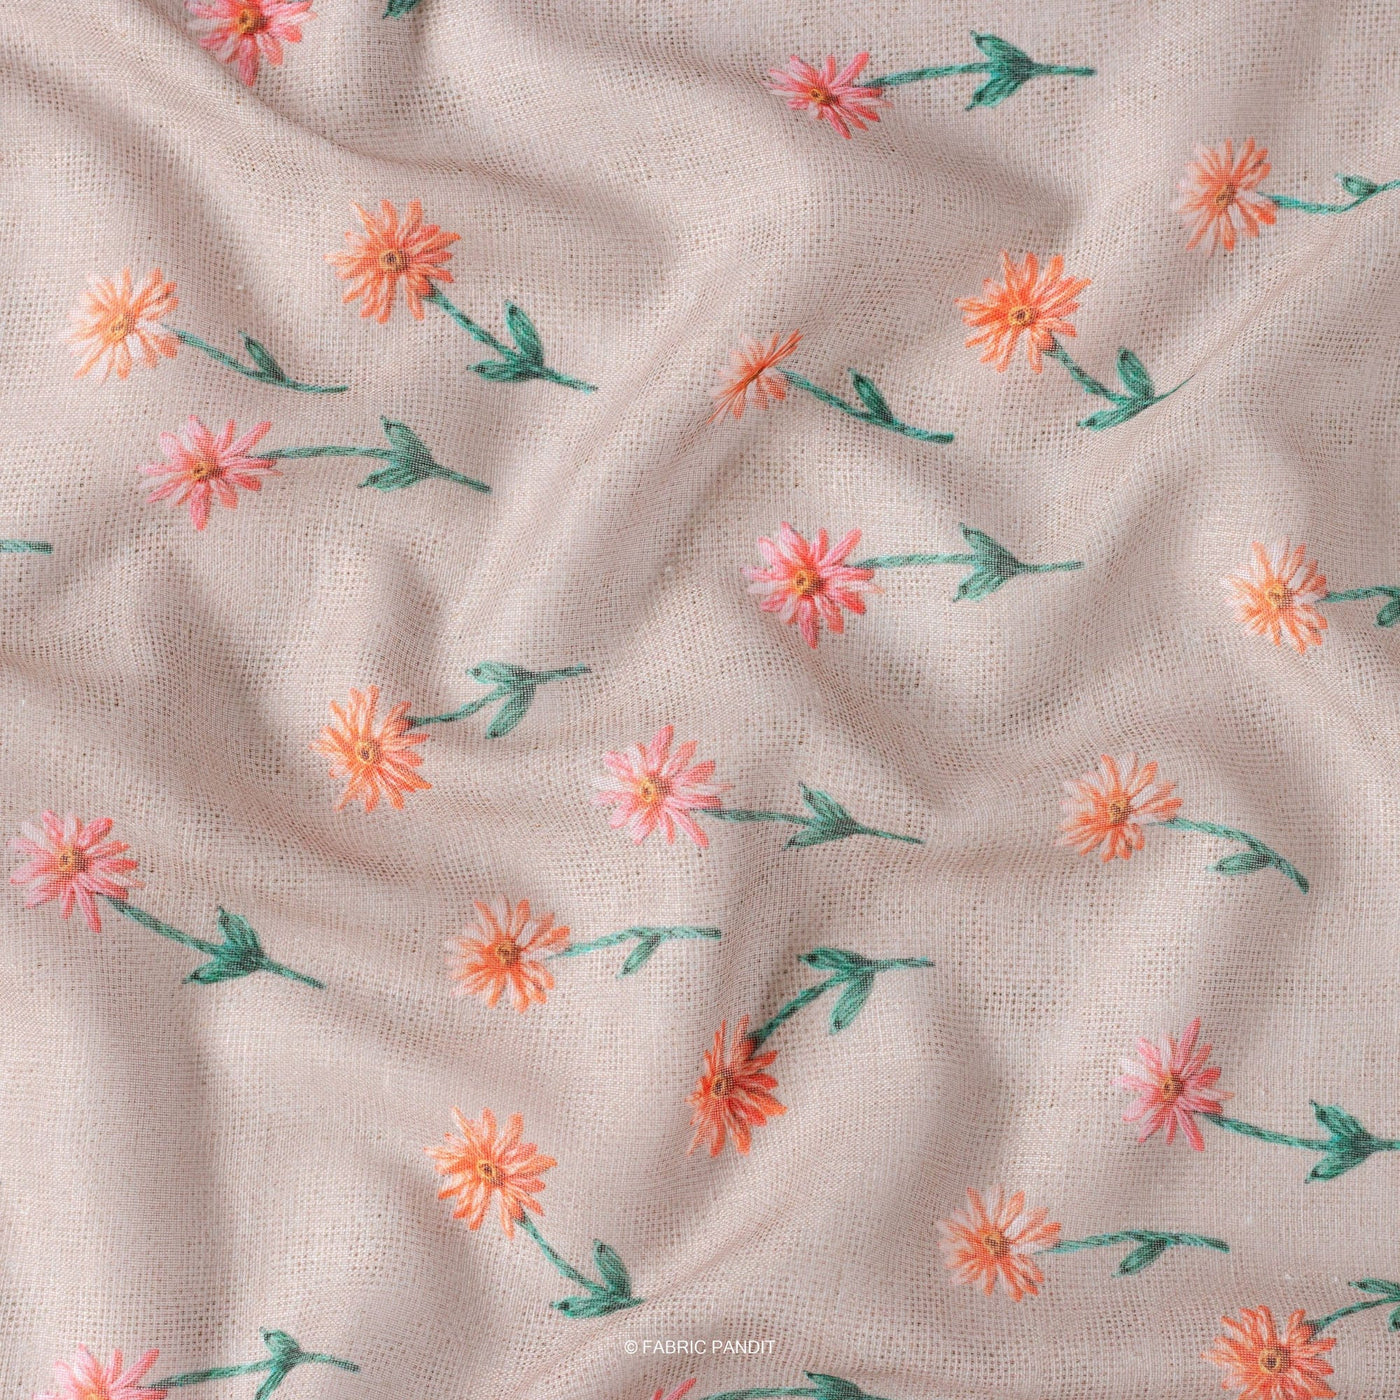 Fabric Pandit Fabric Dusty Grey and Orange Daisies Digital Printed Poly Blend Linen Neps Fabric (Width 44 Inches)